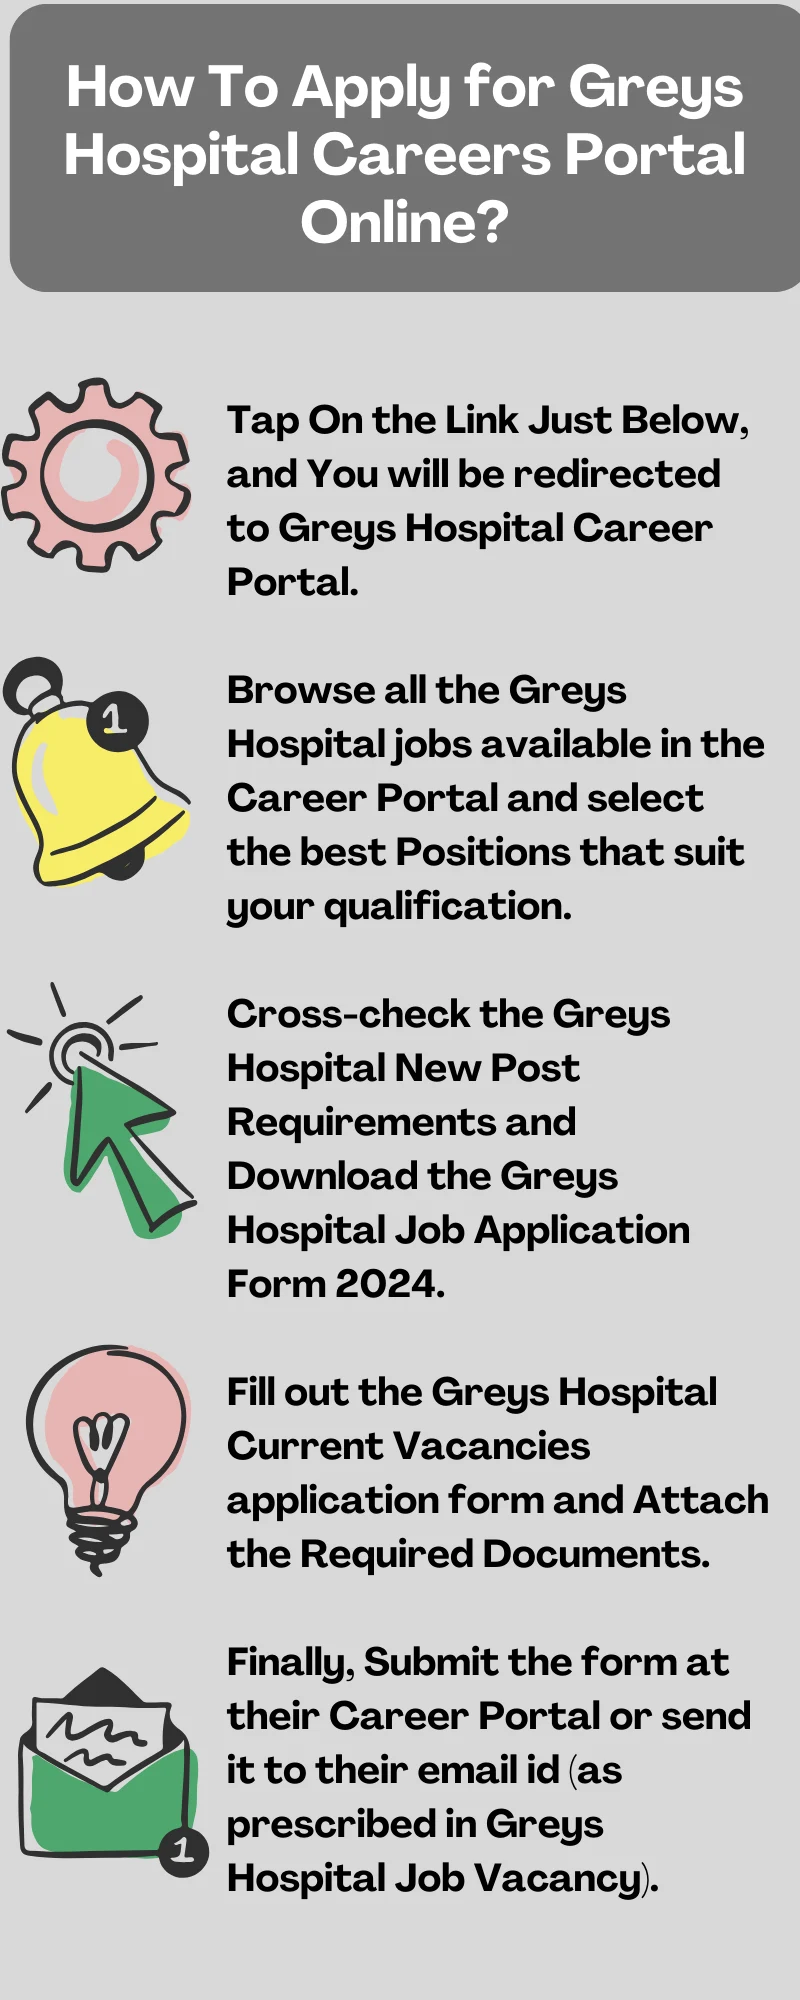 How To Apply for Greys Hospital Careers Portal Online?